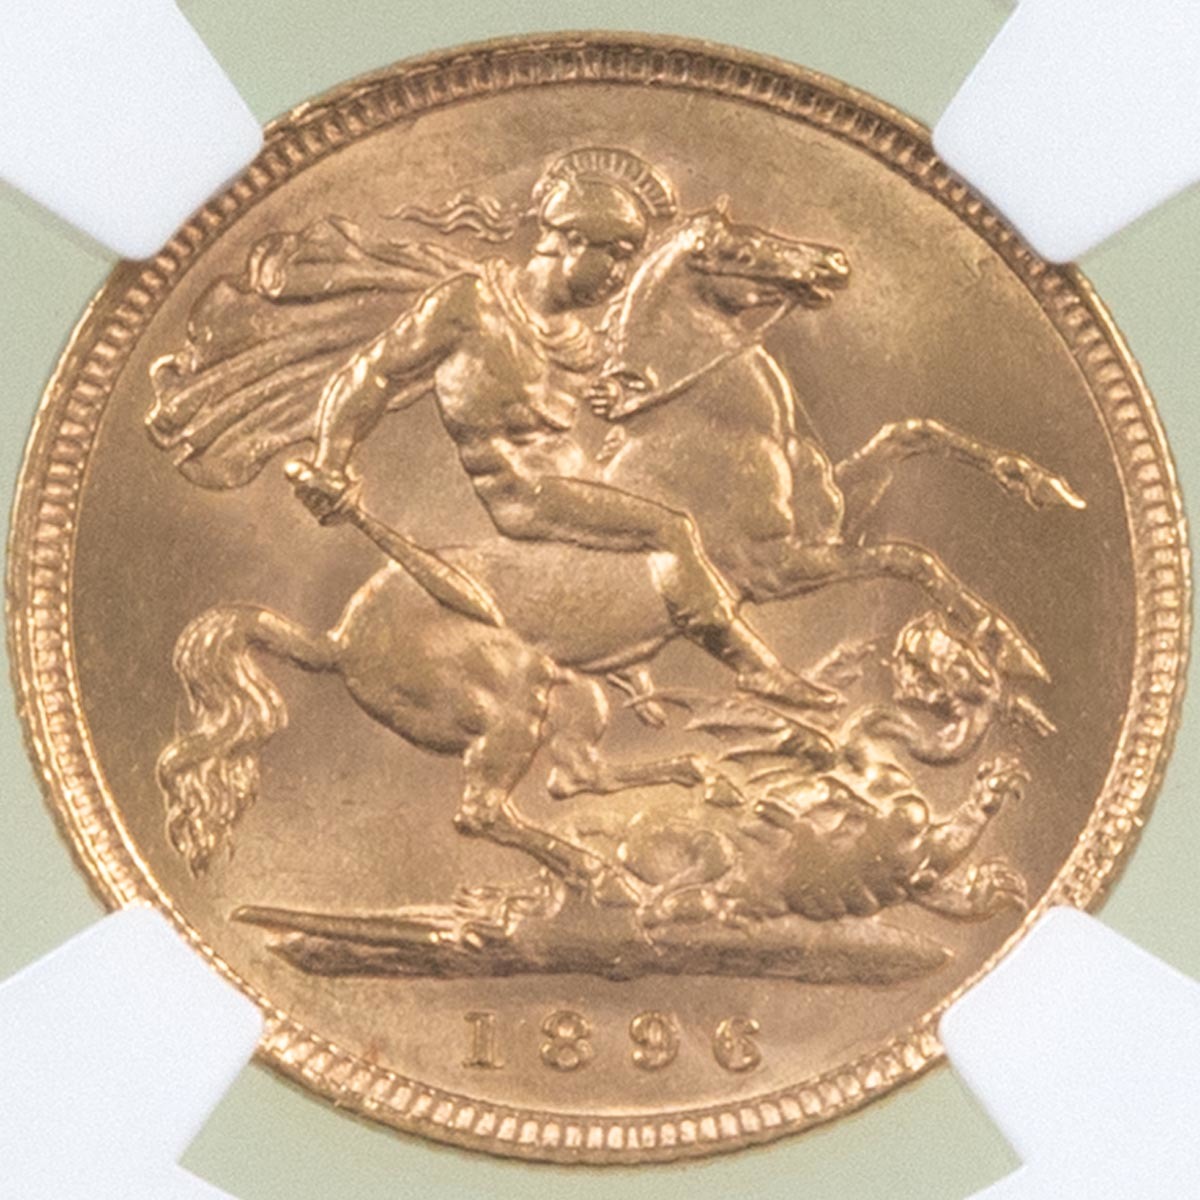 1896 Queen Victoria Gold Half Sovereign London Mint NGC Graded MS 62 Reverse